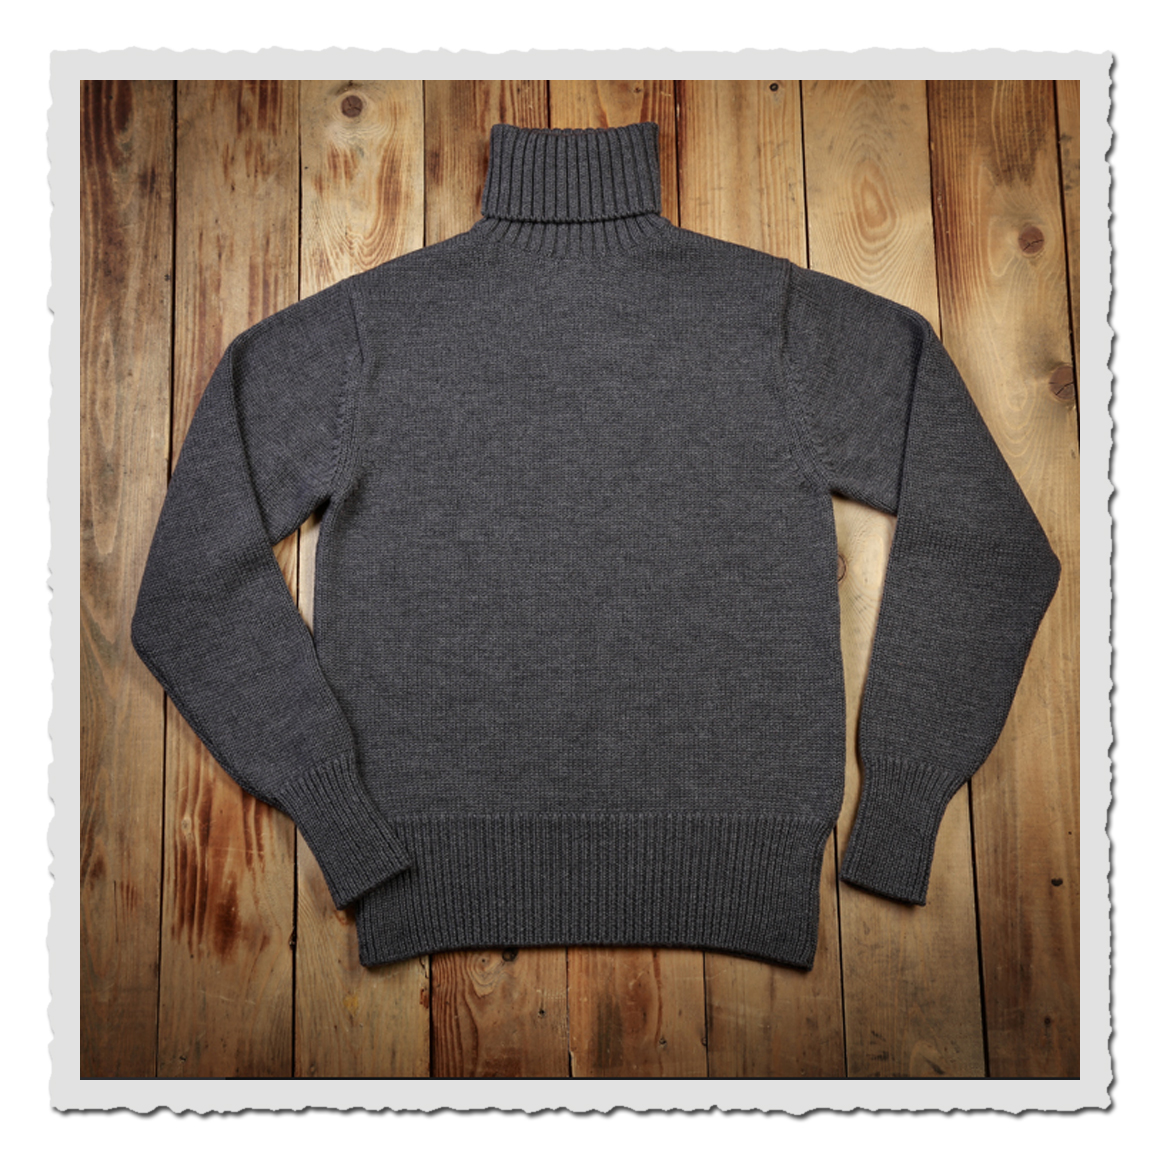 alter uboot fahrer pullover us army